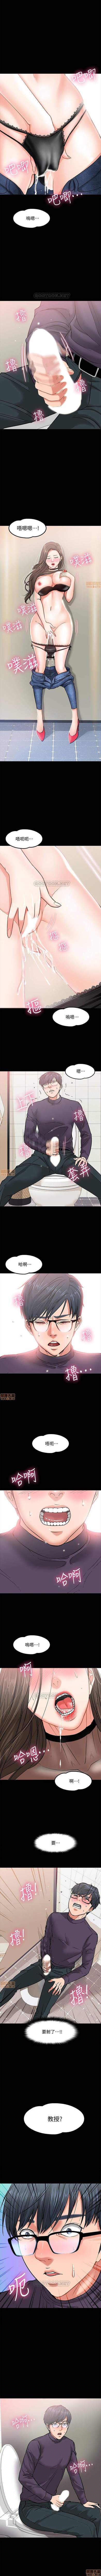 Round Ass PROFESSOR, ARE YOU JUST GOING TO LOOK AT ME? | DESIRE SWAMP | 教授，你還等什麼? Ch. 3 [Chinese] Manhwa Maledom - Page 7